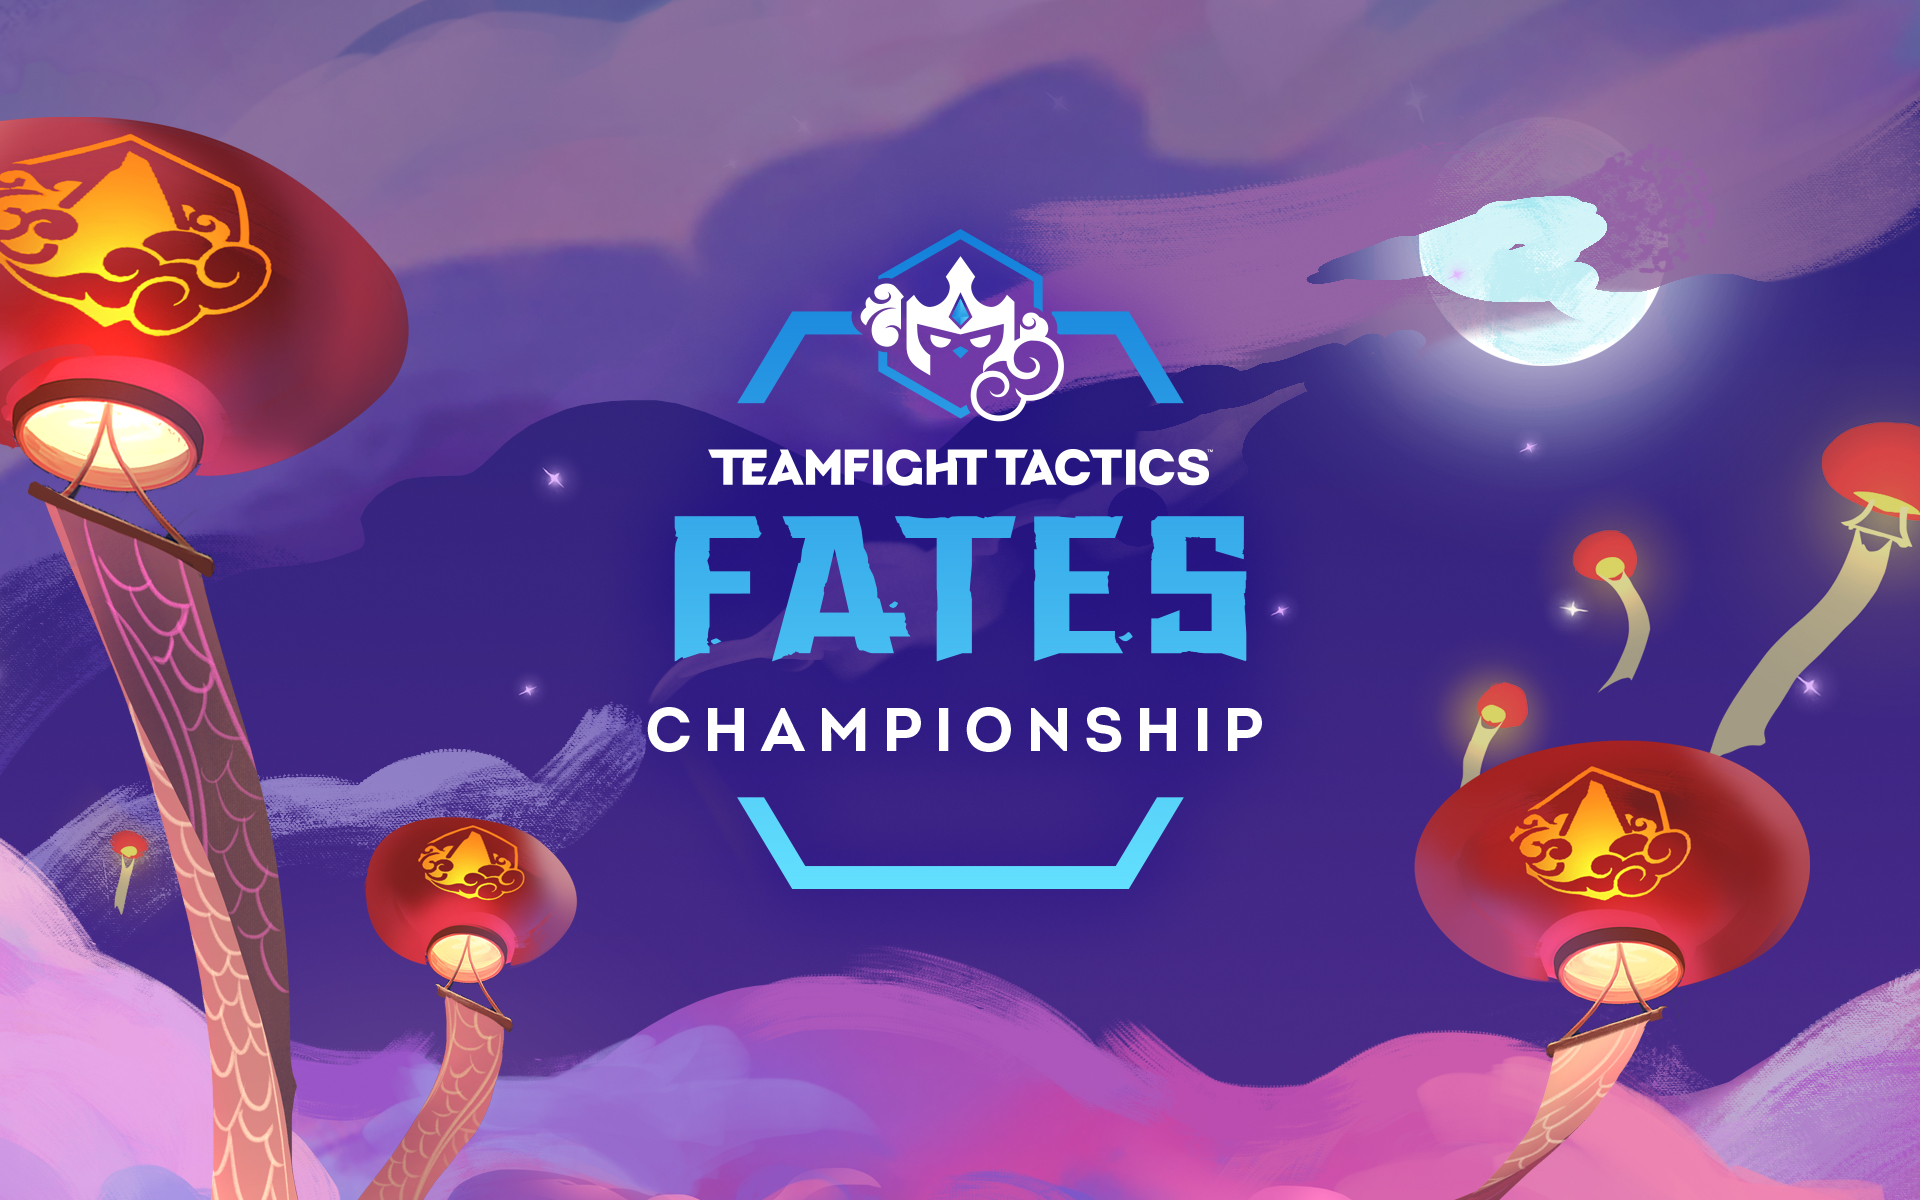 Gøre mit bedste Forståelse malt Teamfight Tactics on Twitter: "The Teamfight Tactics Fates Championship is  coming! 🏮 From April 7 - 9, 24 players around the world will compete for a  $250,000 prize pool and the title